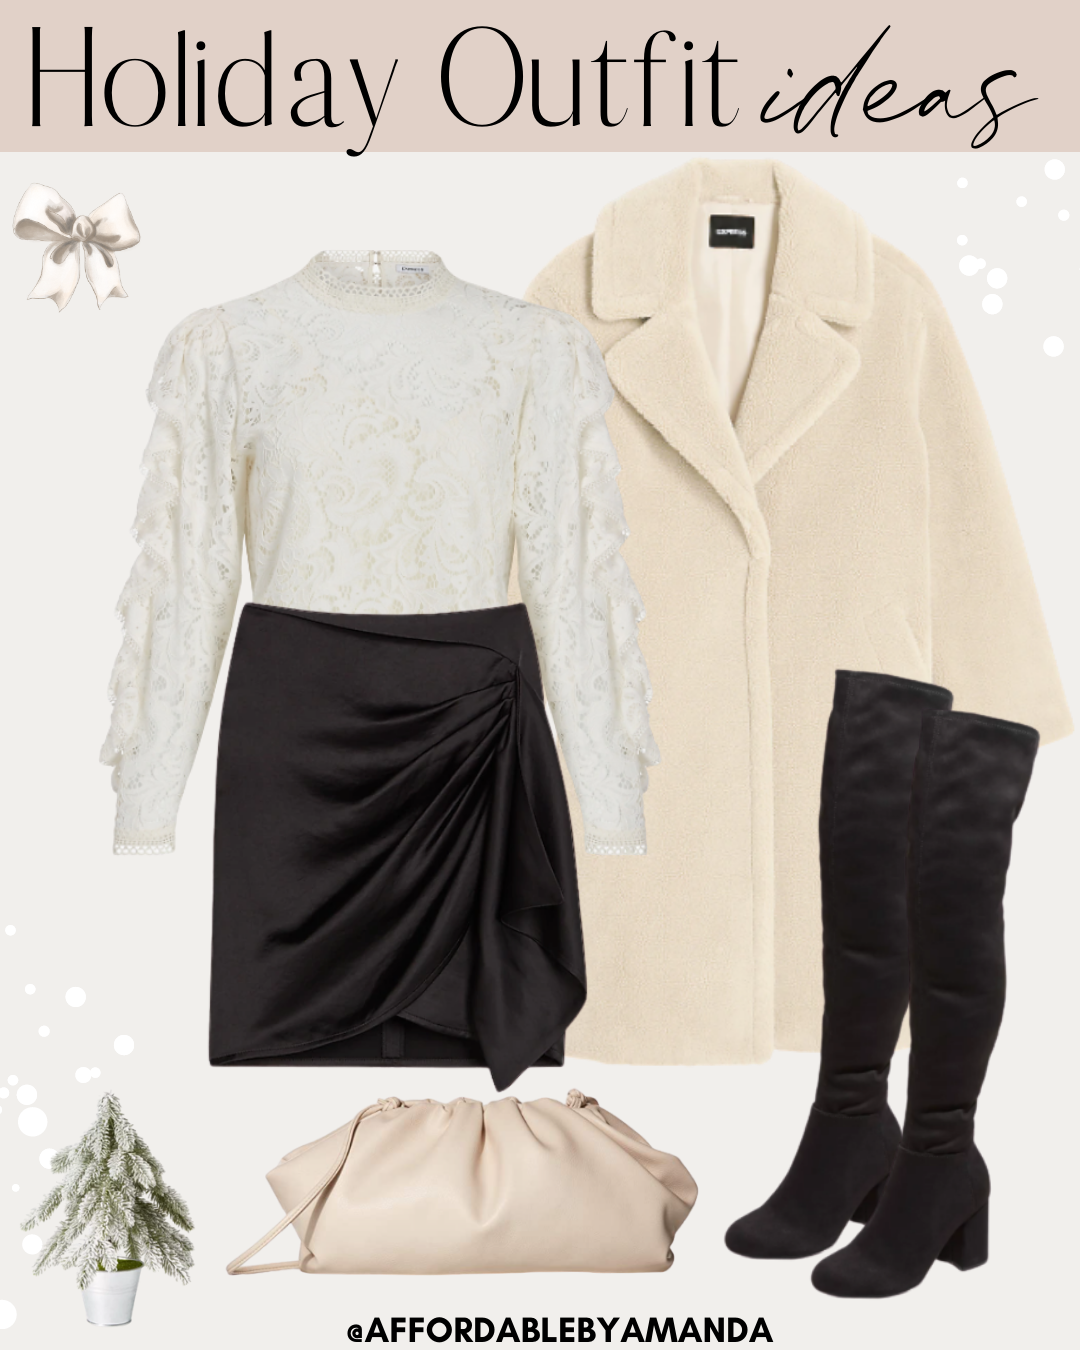 Best Holiday Outfits - 20 Holiday Outfits to Wear for 2020 - Affordable by Amanda